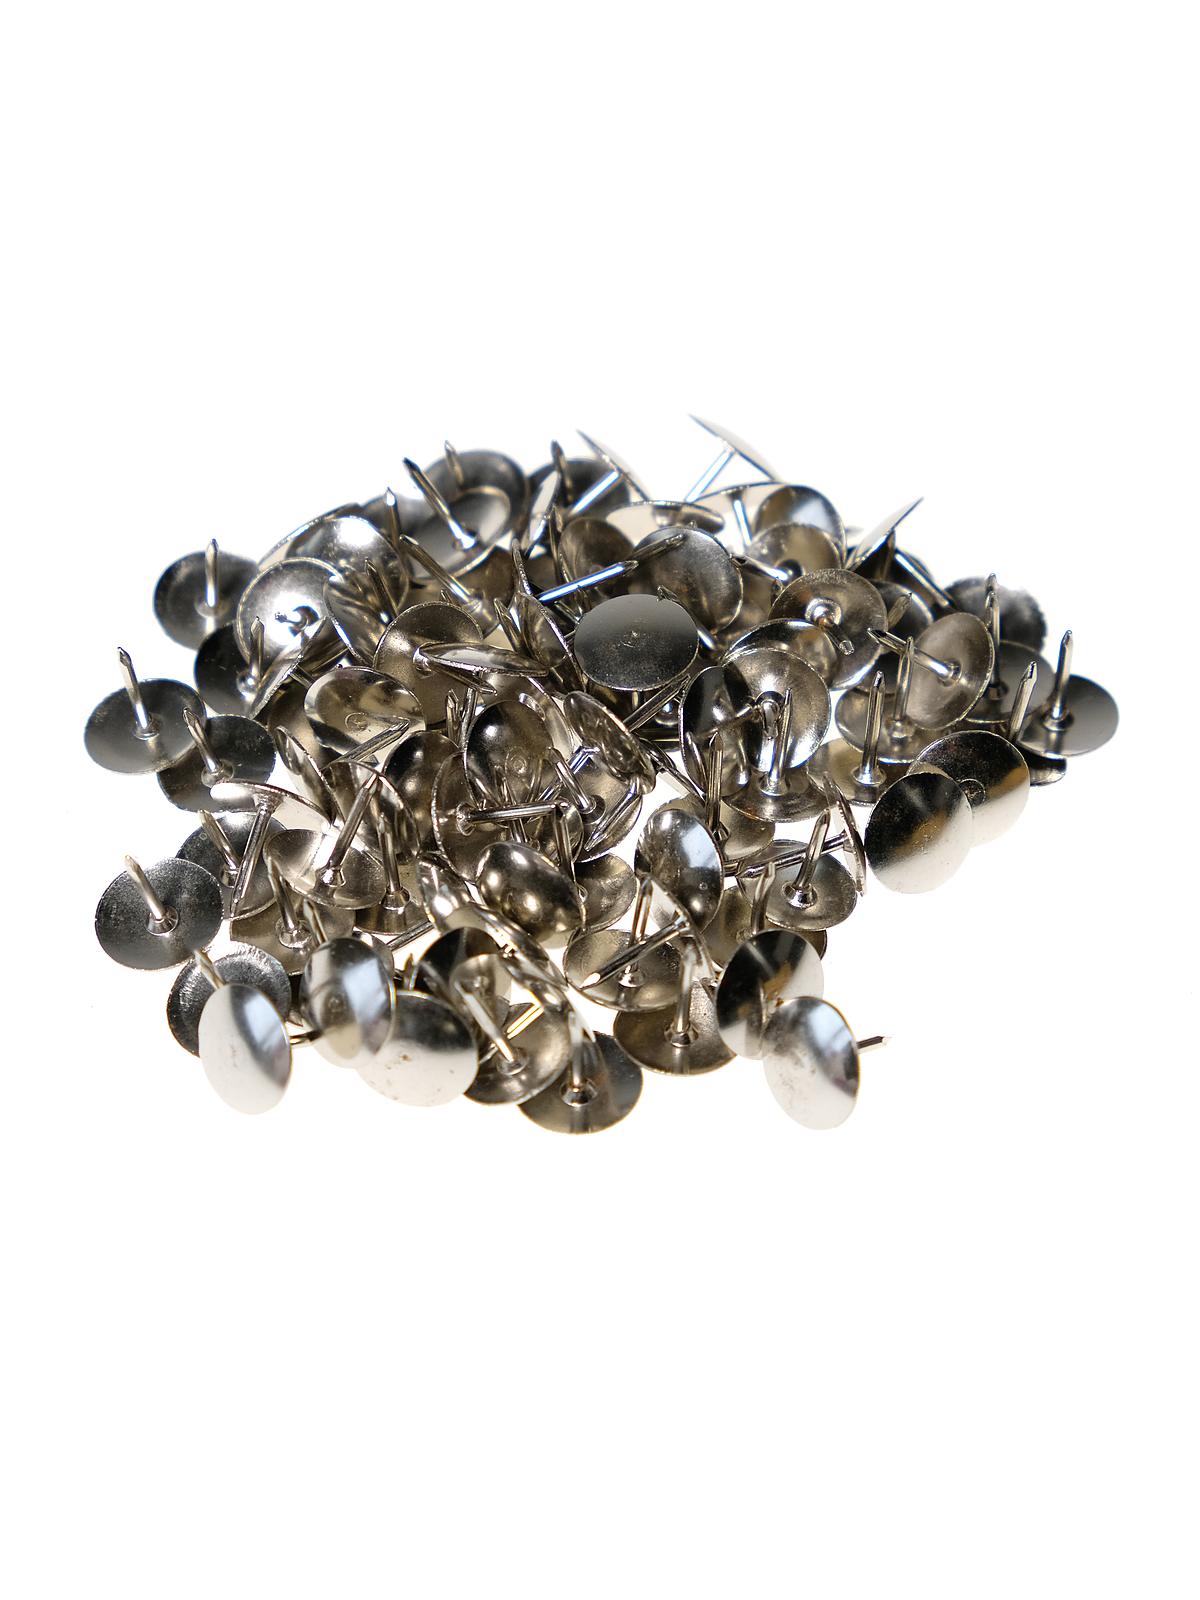 Thumb Tacks 3 8 In. Nickel Plated Pack Of 100